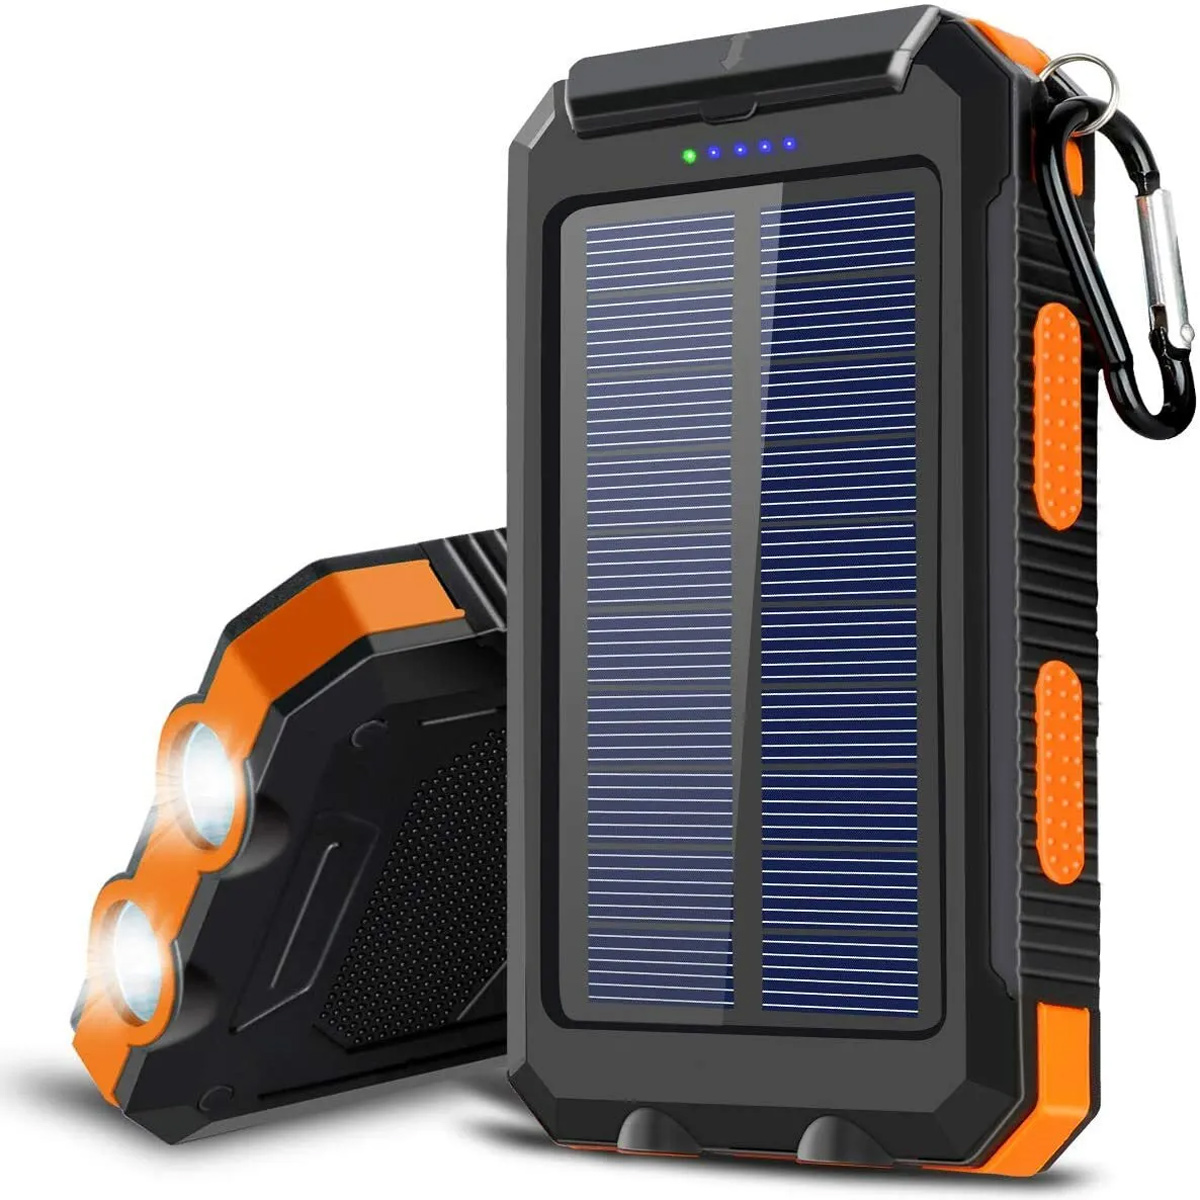 

-solar-charger - 10000mah Portable Charger,solar Power Bank,external Battery Pack 5v3.1a Qc 3.0 Built-in Super Bright Flashlight (orange)